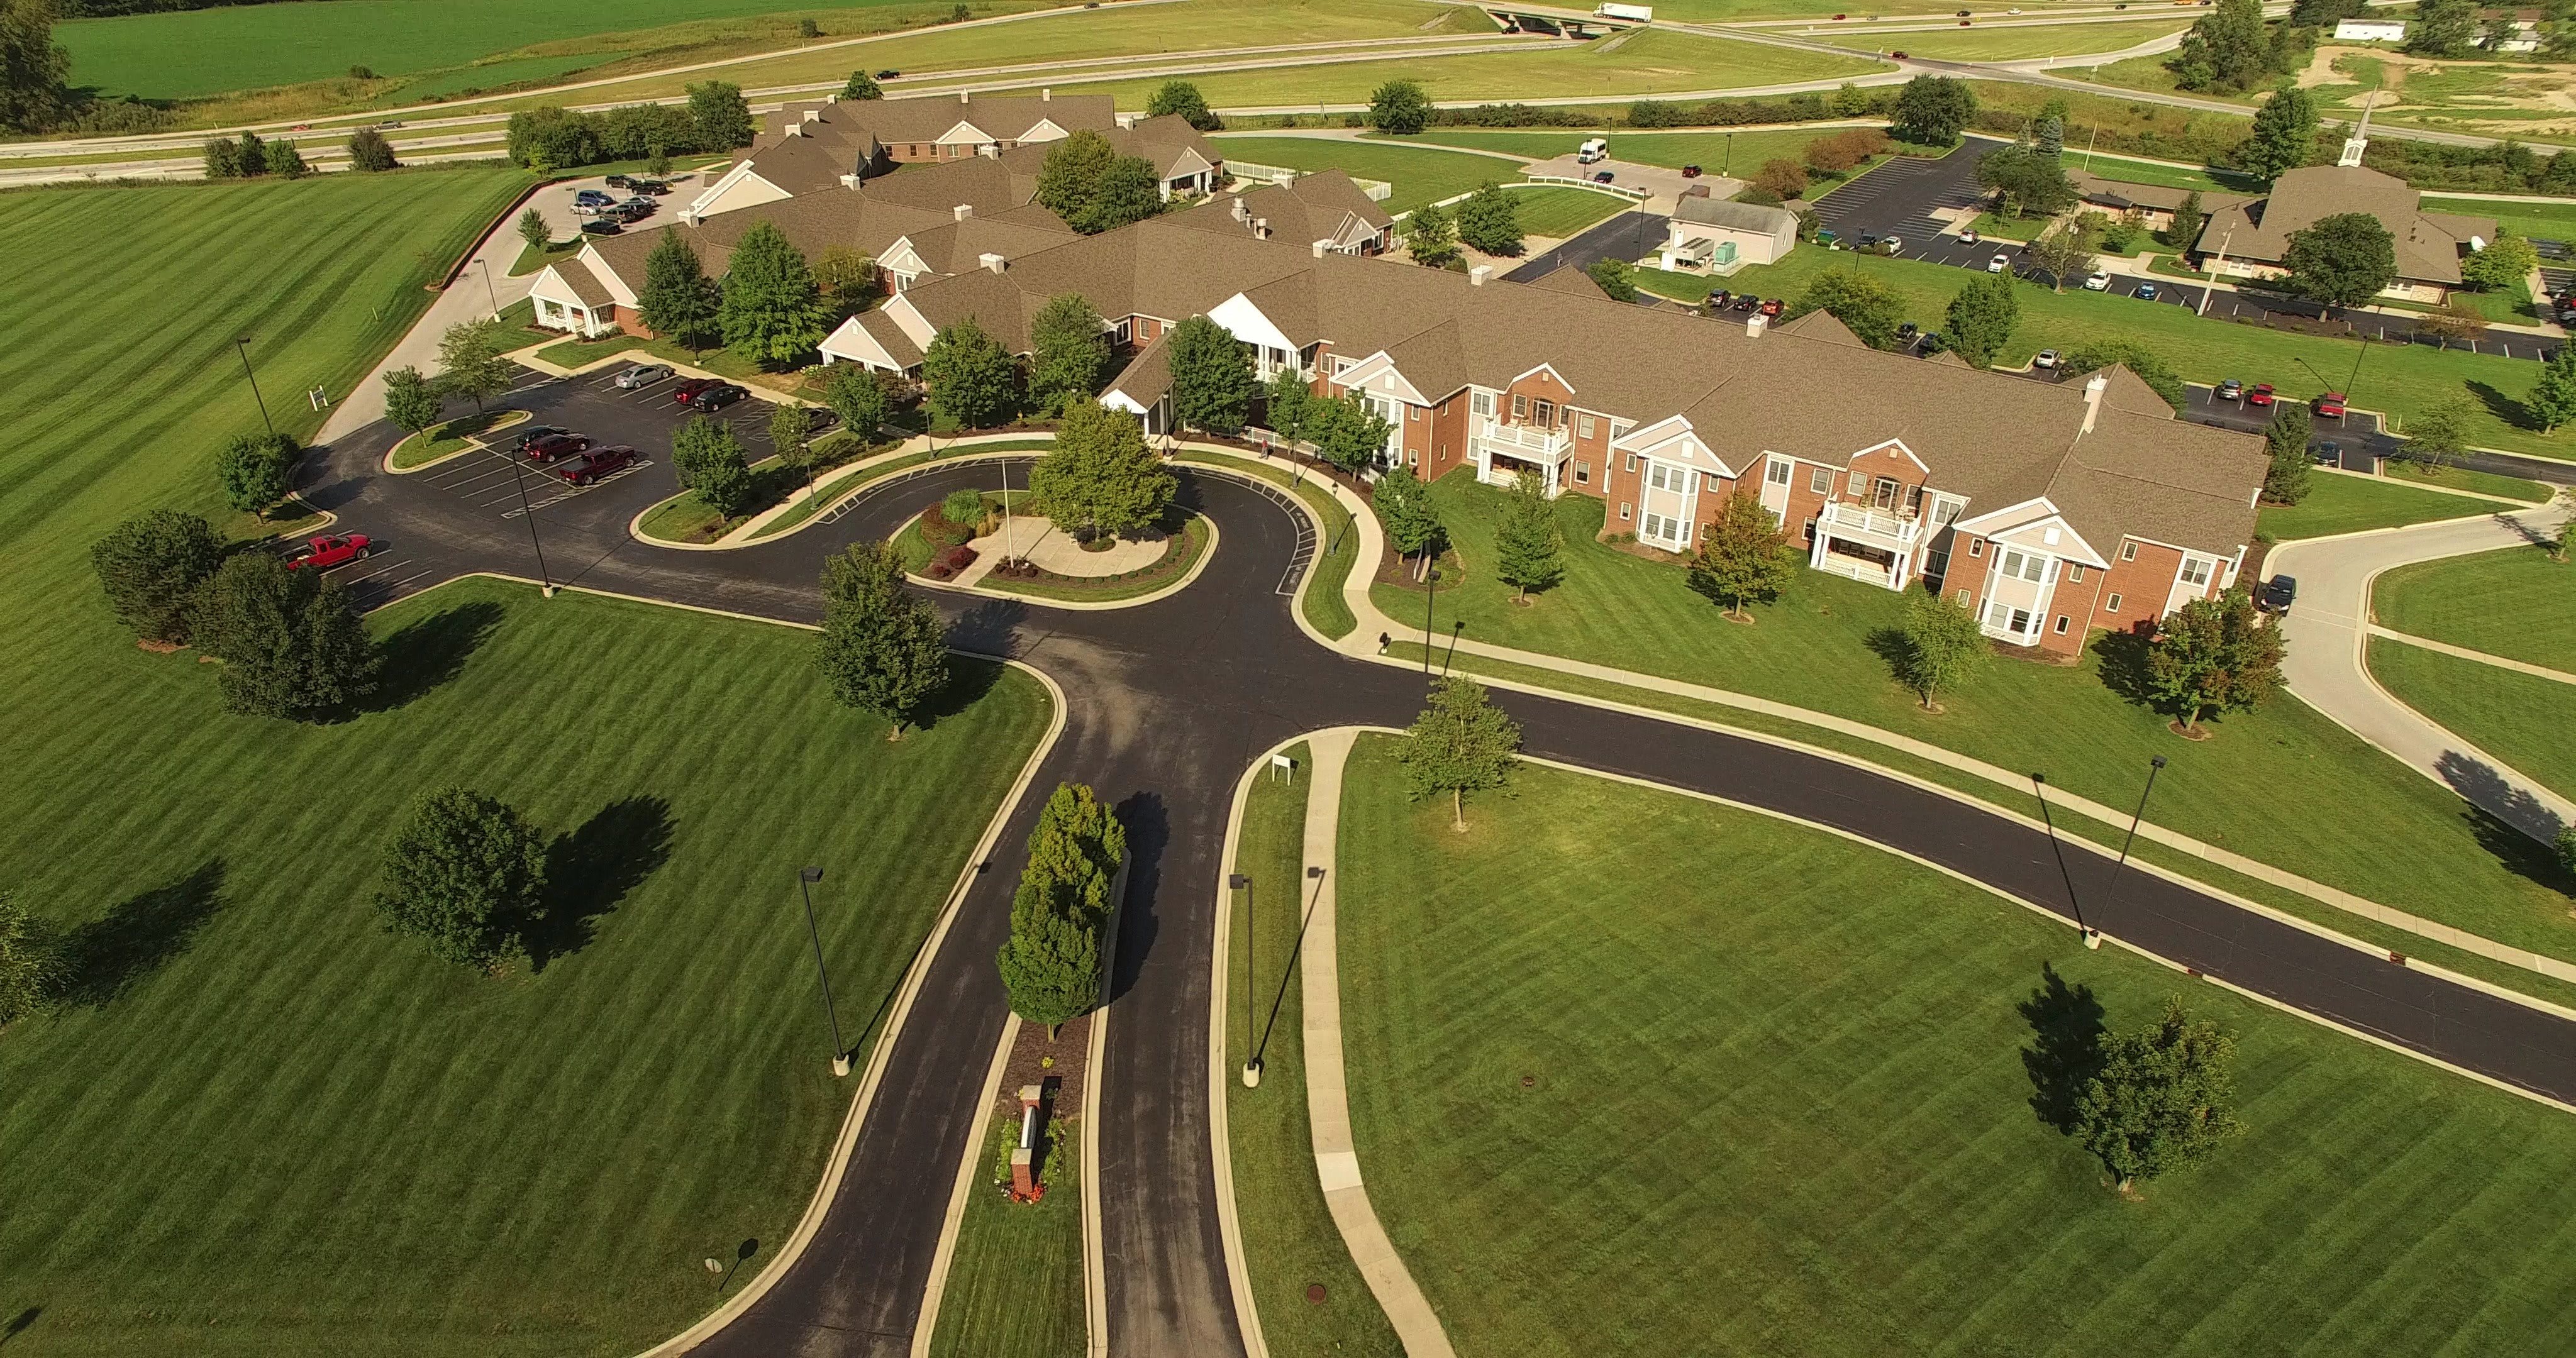 Heritage Pointe of Huntington, a CCRC aerial view of community